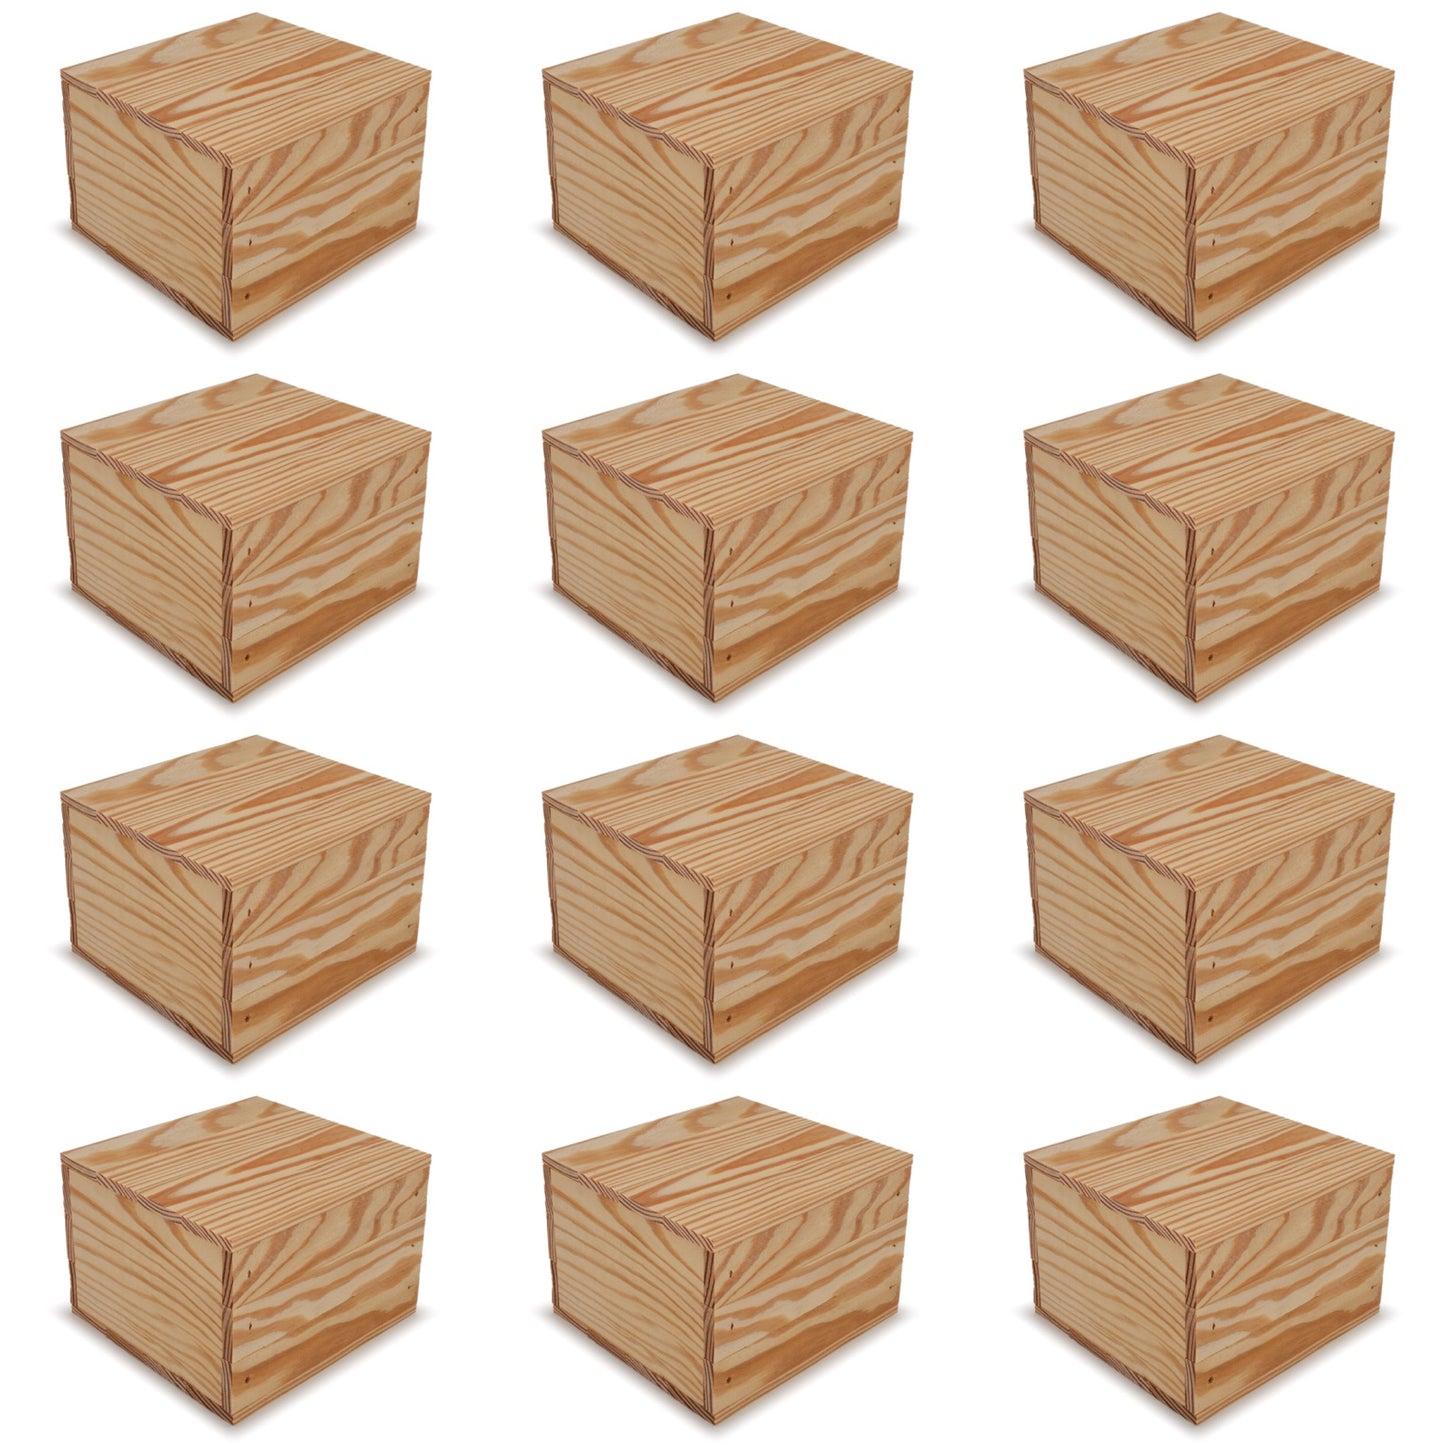 12 Small wooden crates with lid 6x6.25x5.25